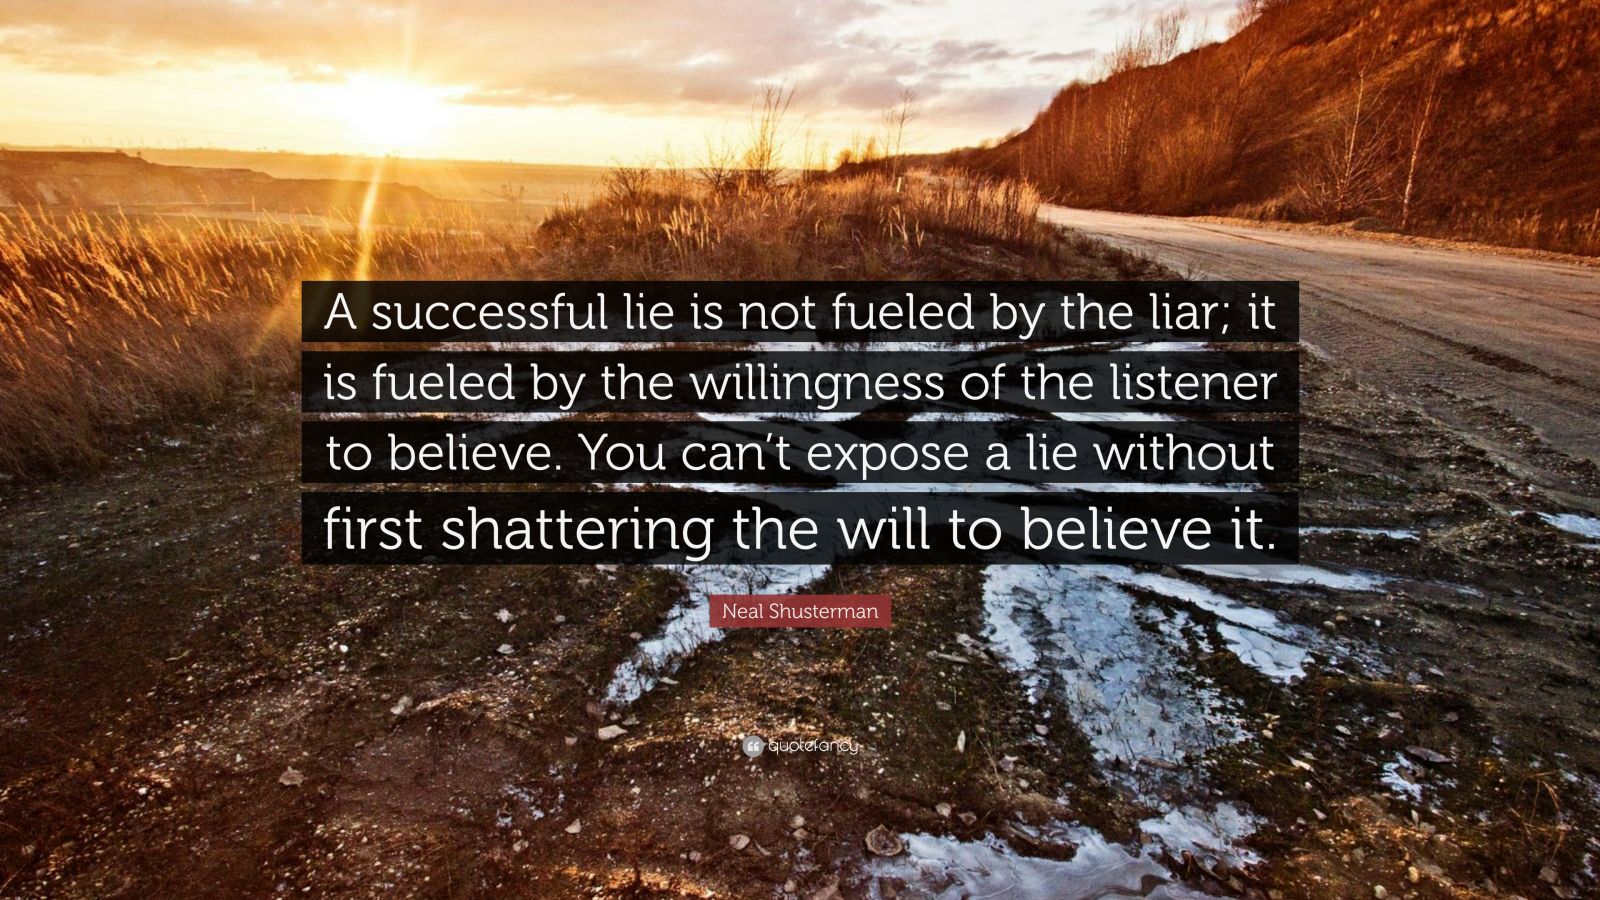 6403420 Neal Shusterman Quote A Successful Lie Is Not Fueled By The Liar 